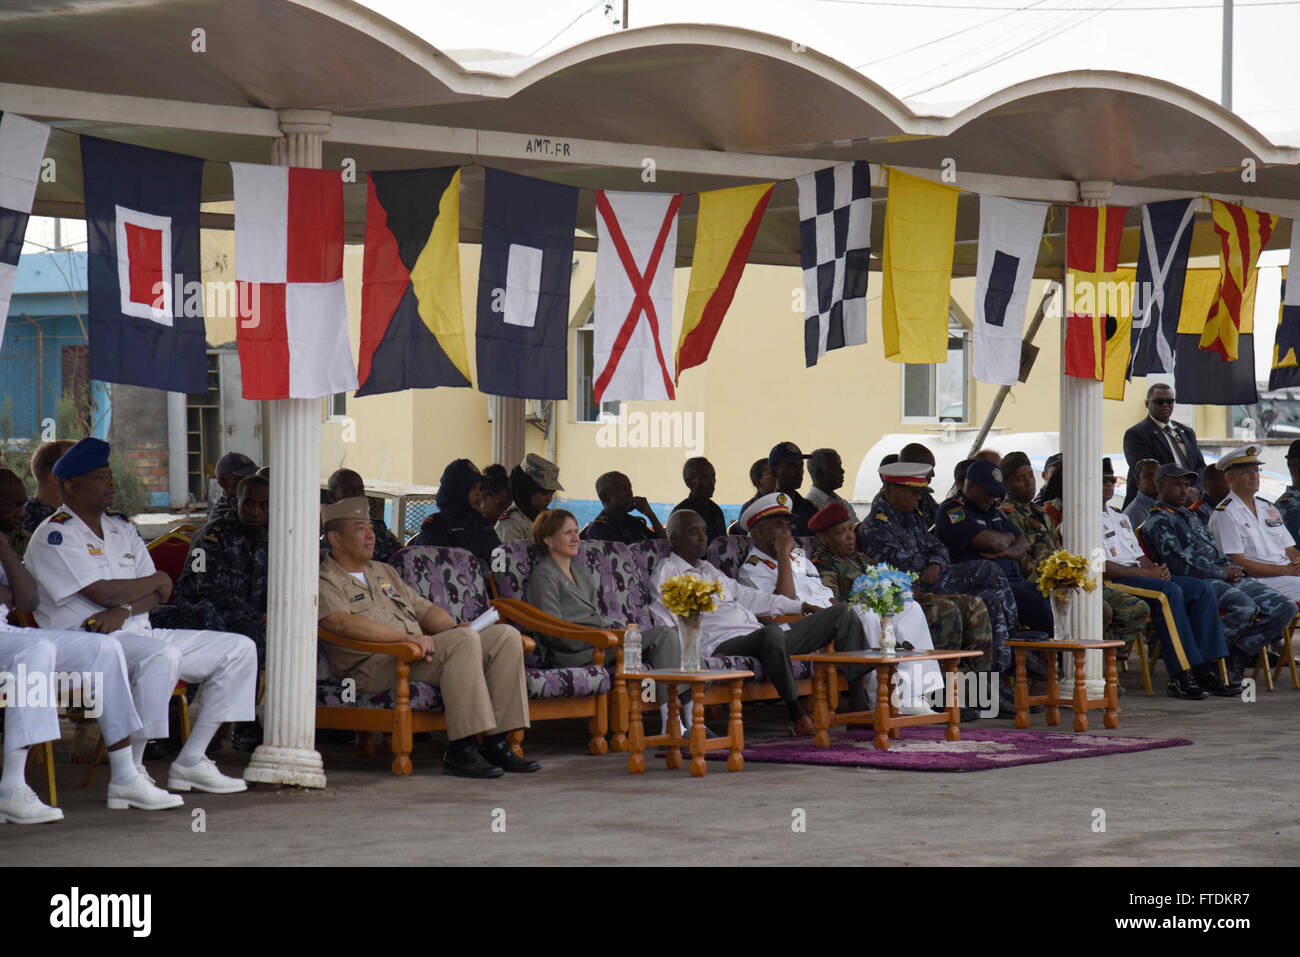 160201-F-WR377-033 DJIBOUTI (Feb. 1, 2016) Representatives from participating nations observe the opening ceremony for exercise Cutlass Express 2016 at the Djibouti Navy Base, Djibouti, Feb. 1, 2016. Cutlass Express is a U.S. Africa Command-sponsored multinational maritime exercise designed to increase maritime safety and security in the waters off East Africa, western Indian Ocean, and in the Gulf of Aden. (U.S. Air Force photo by Staff Sgt. Victoria Sneed/Released) Stock Photo